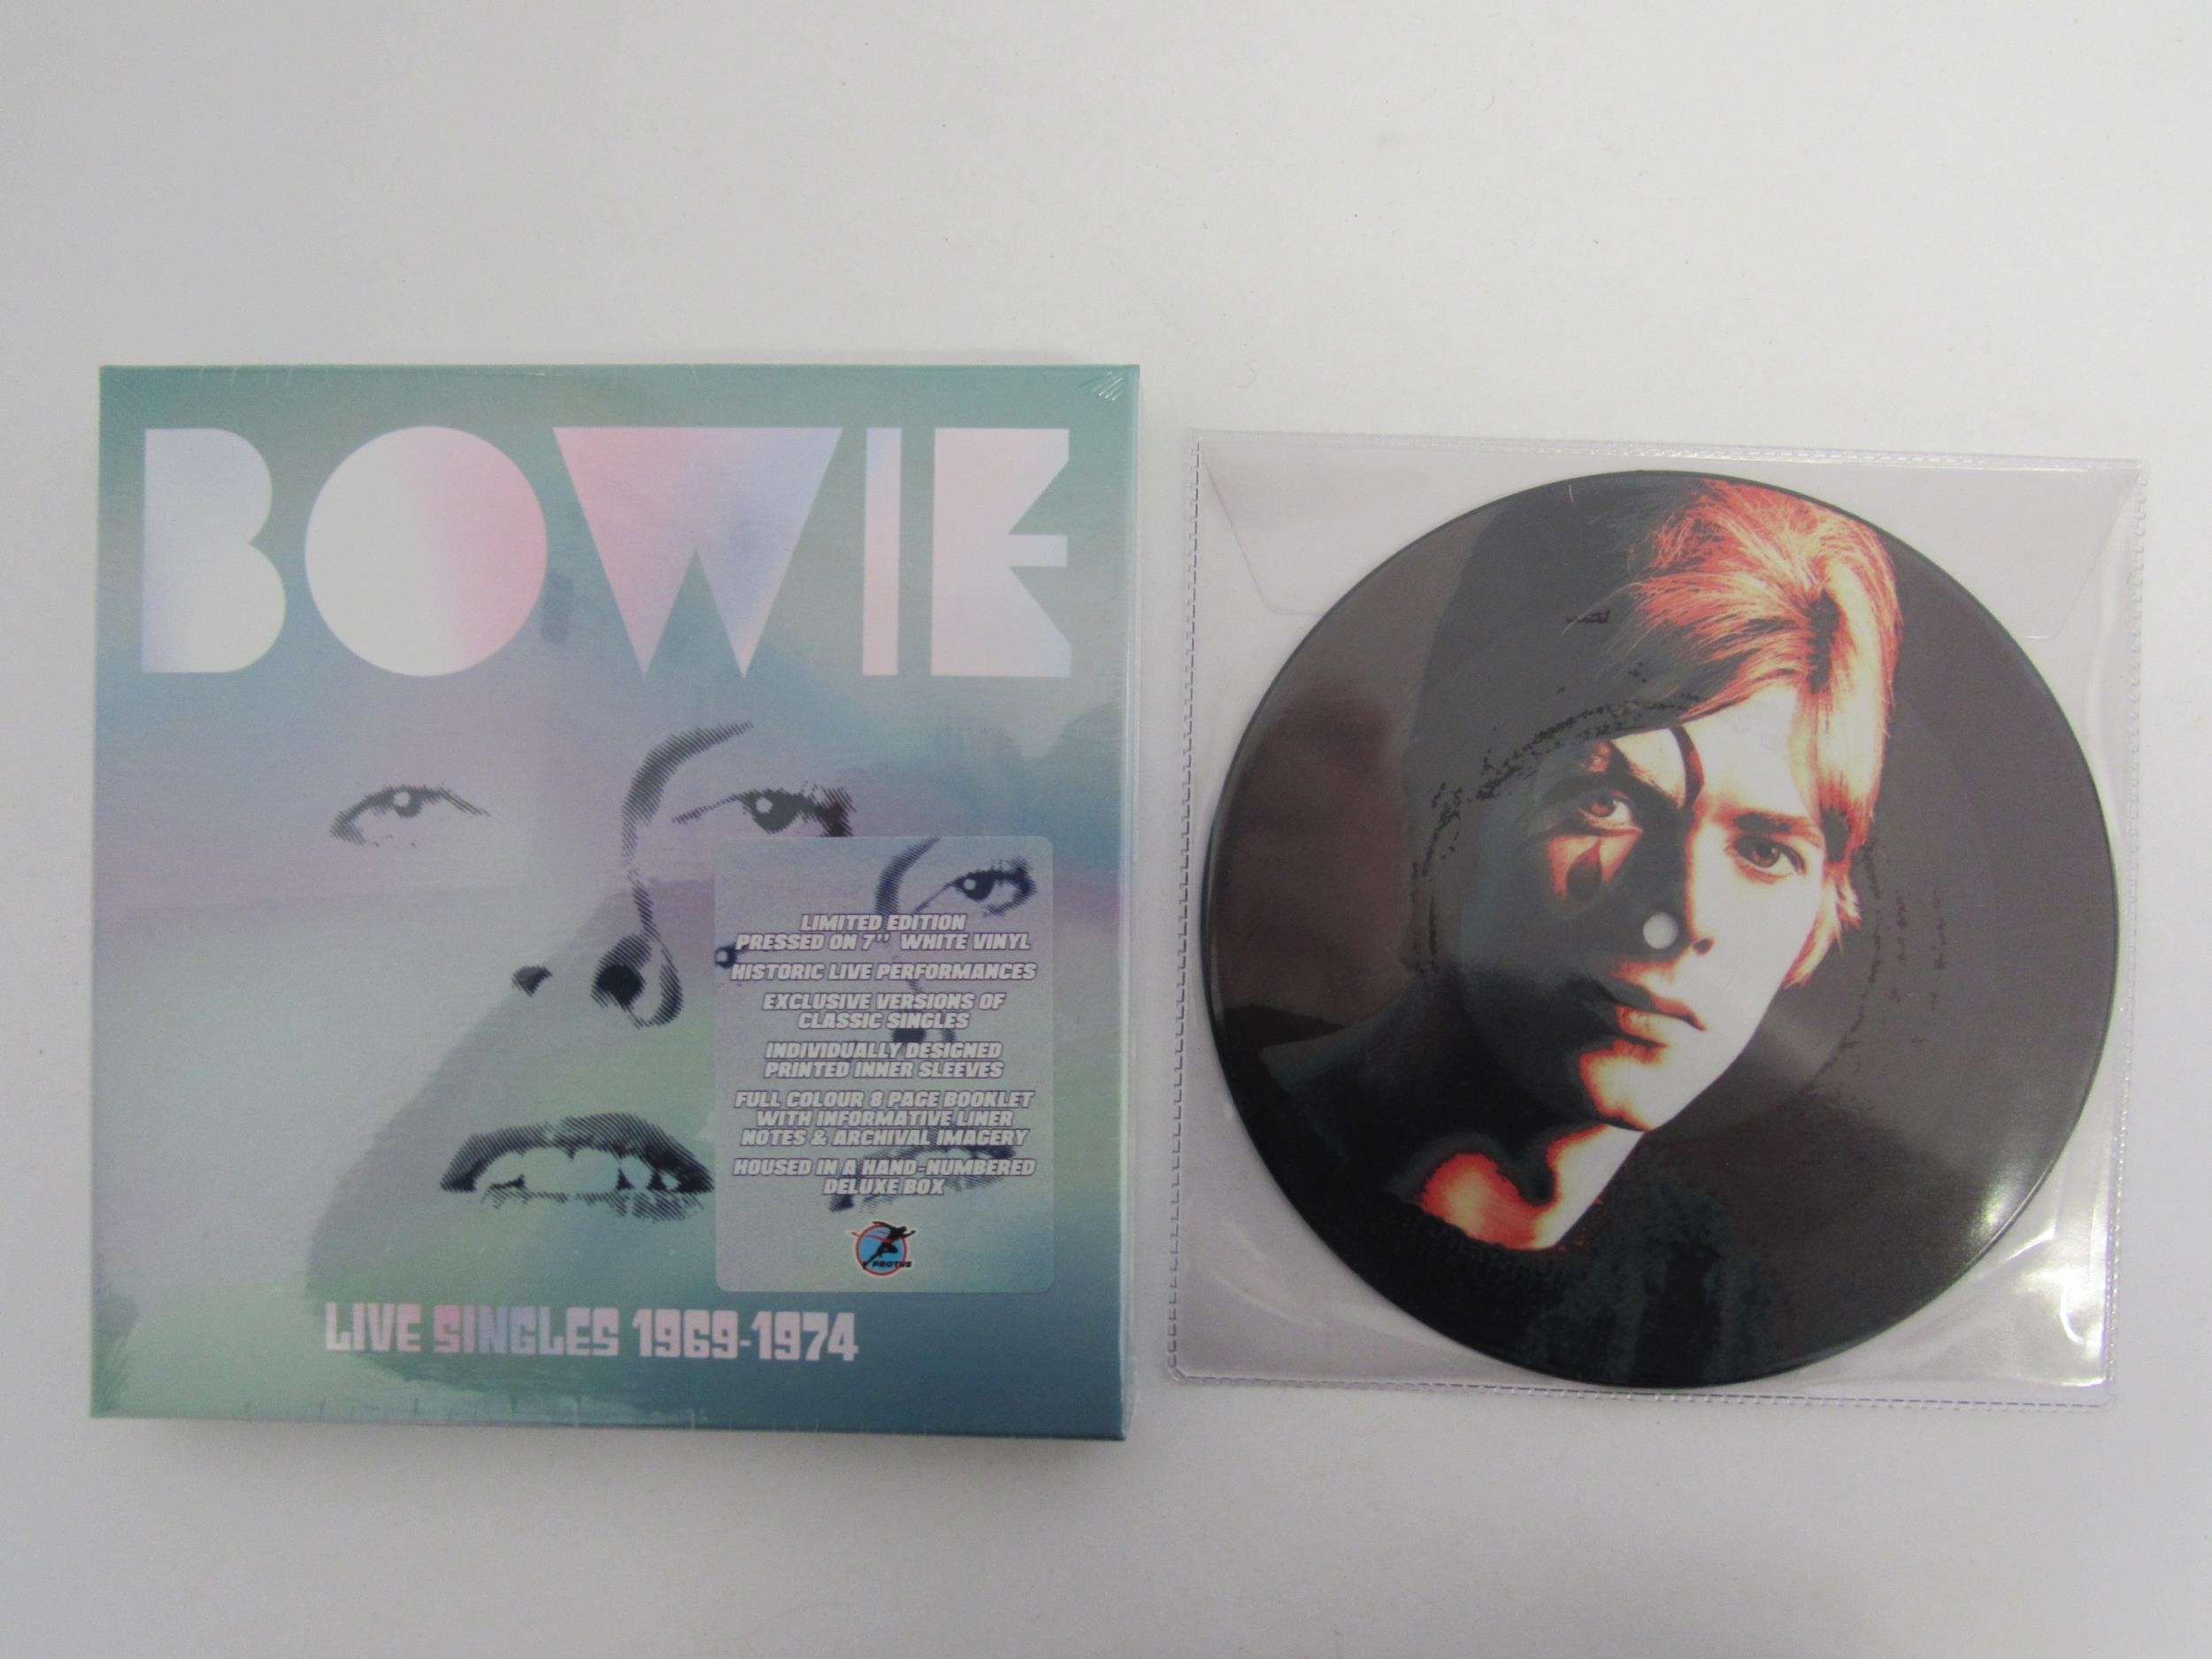 DAVID BOWIE: 'Live Singles 1969-1974' limited edition box set of five 7" singles on white vinyl with